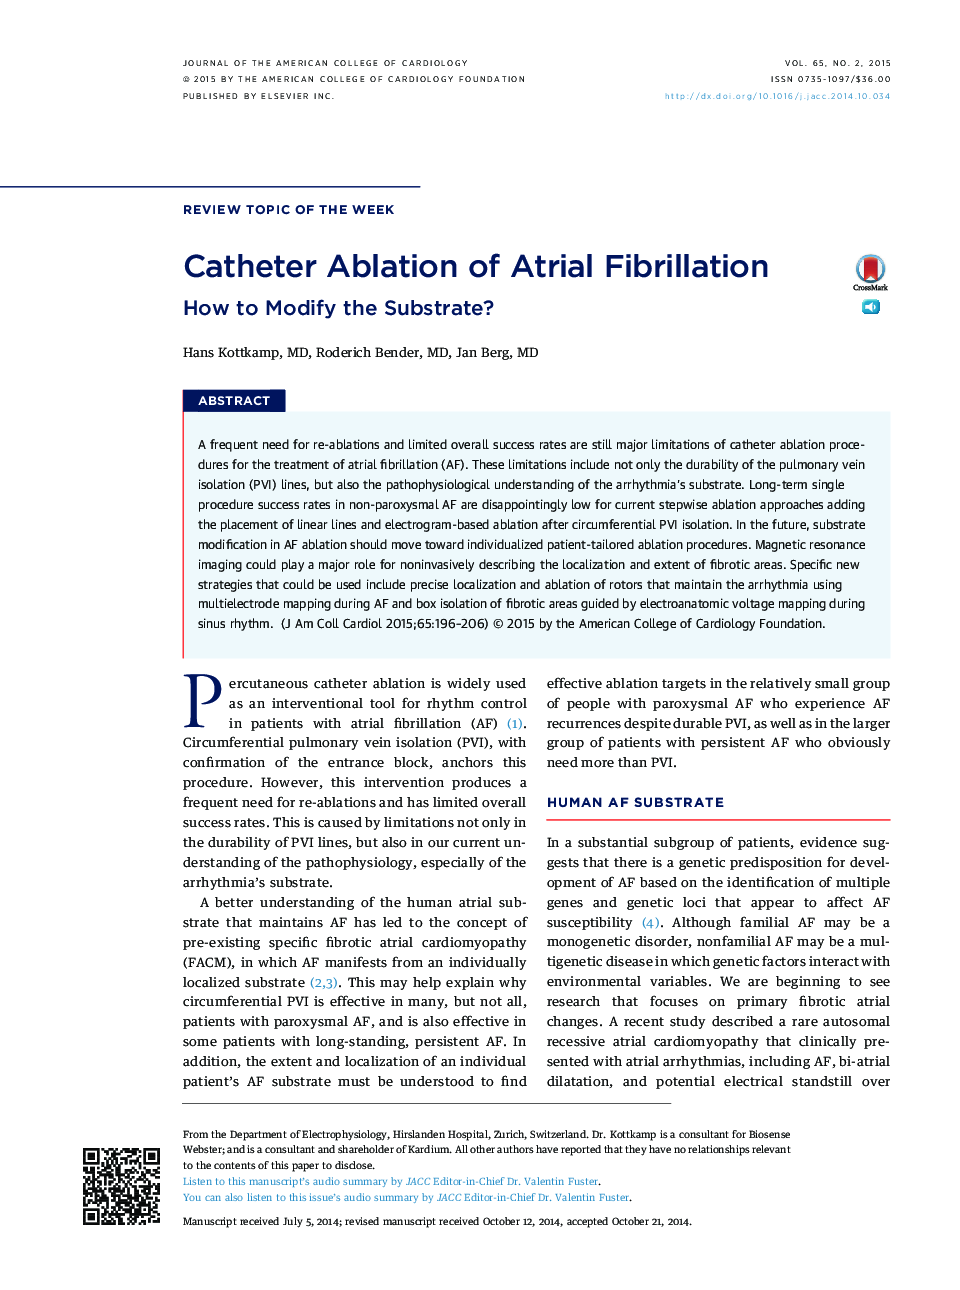 Catheter Ablation of Atrial Fibrillation : How to Modify the Substrate?